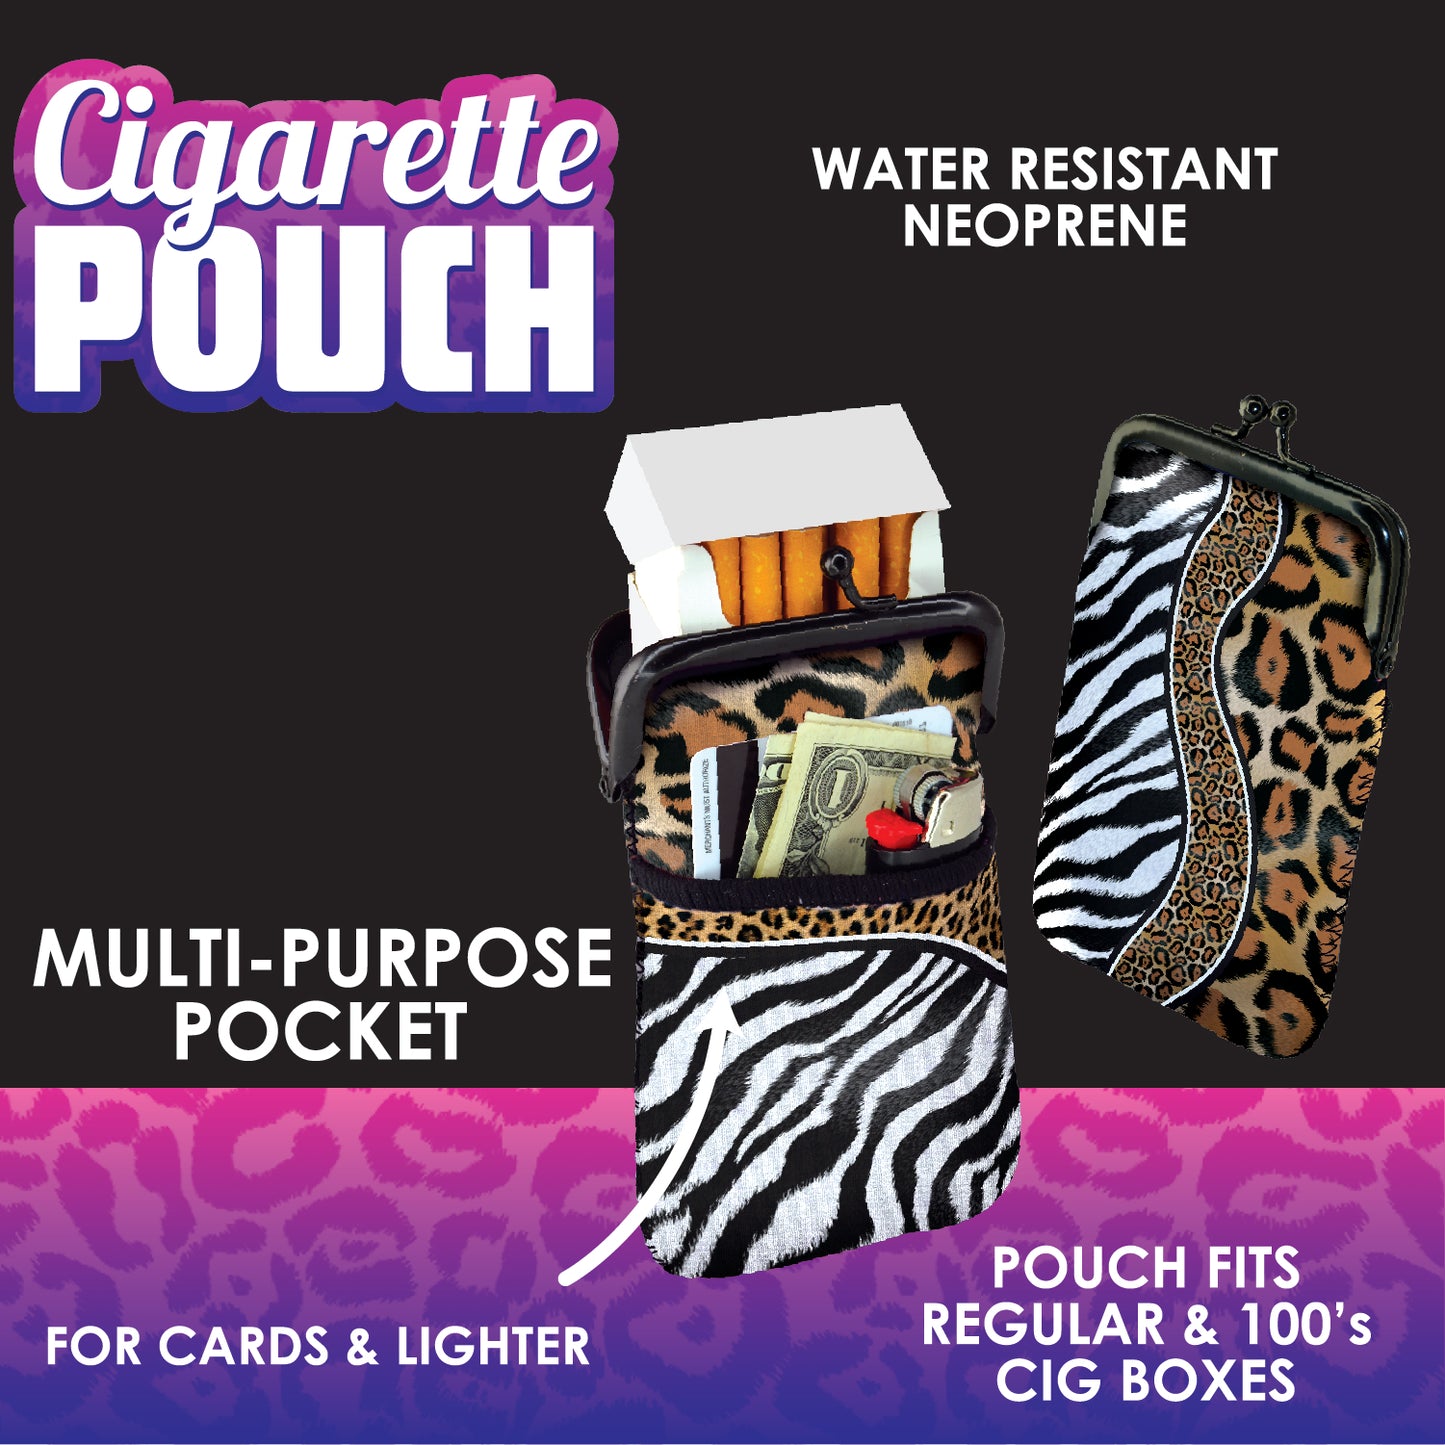 ITEM NUMBER 027803 NEOPRENE CIG POUCH POCKET E 8 PIECES PER DISPLAY